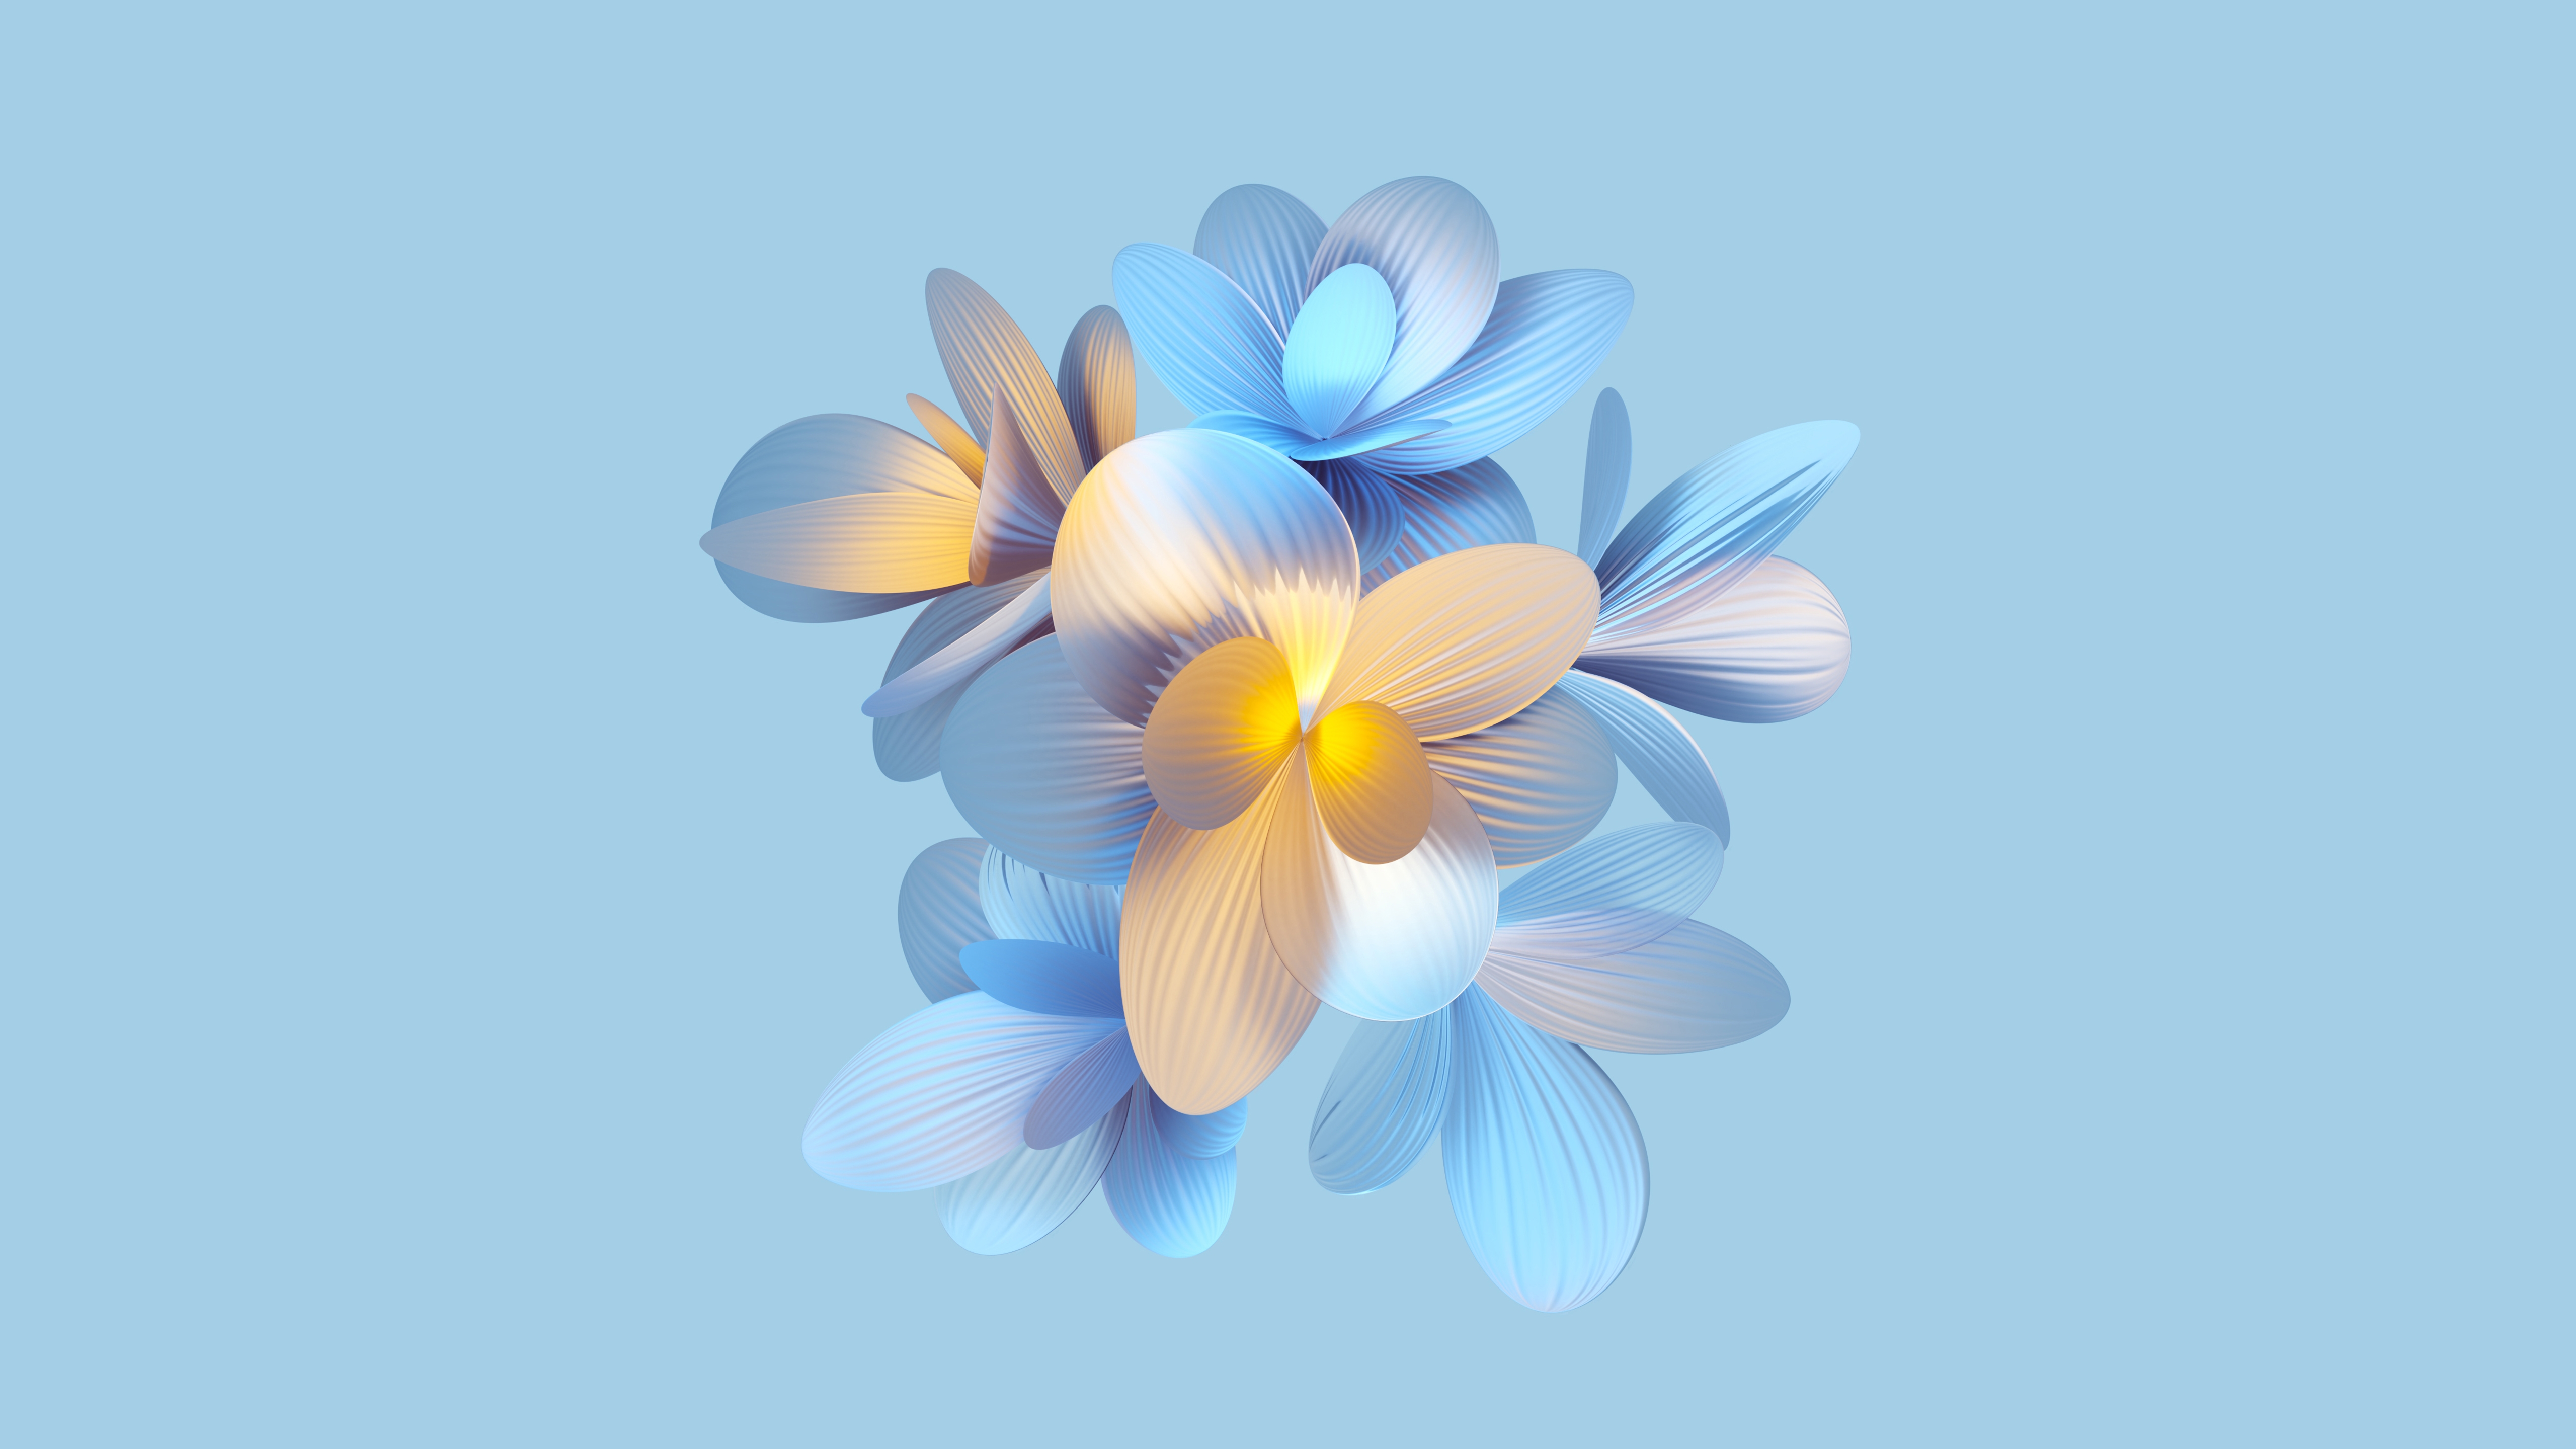 HD wallpaper, 5K, Honor, Stock, Abstract Flower, Pastel Blue, Floral Designs, Cyan